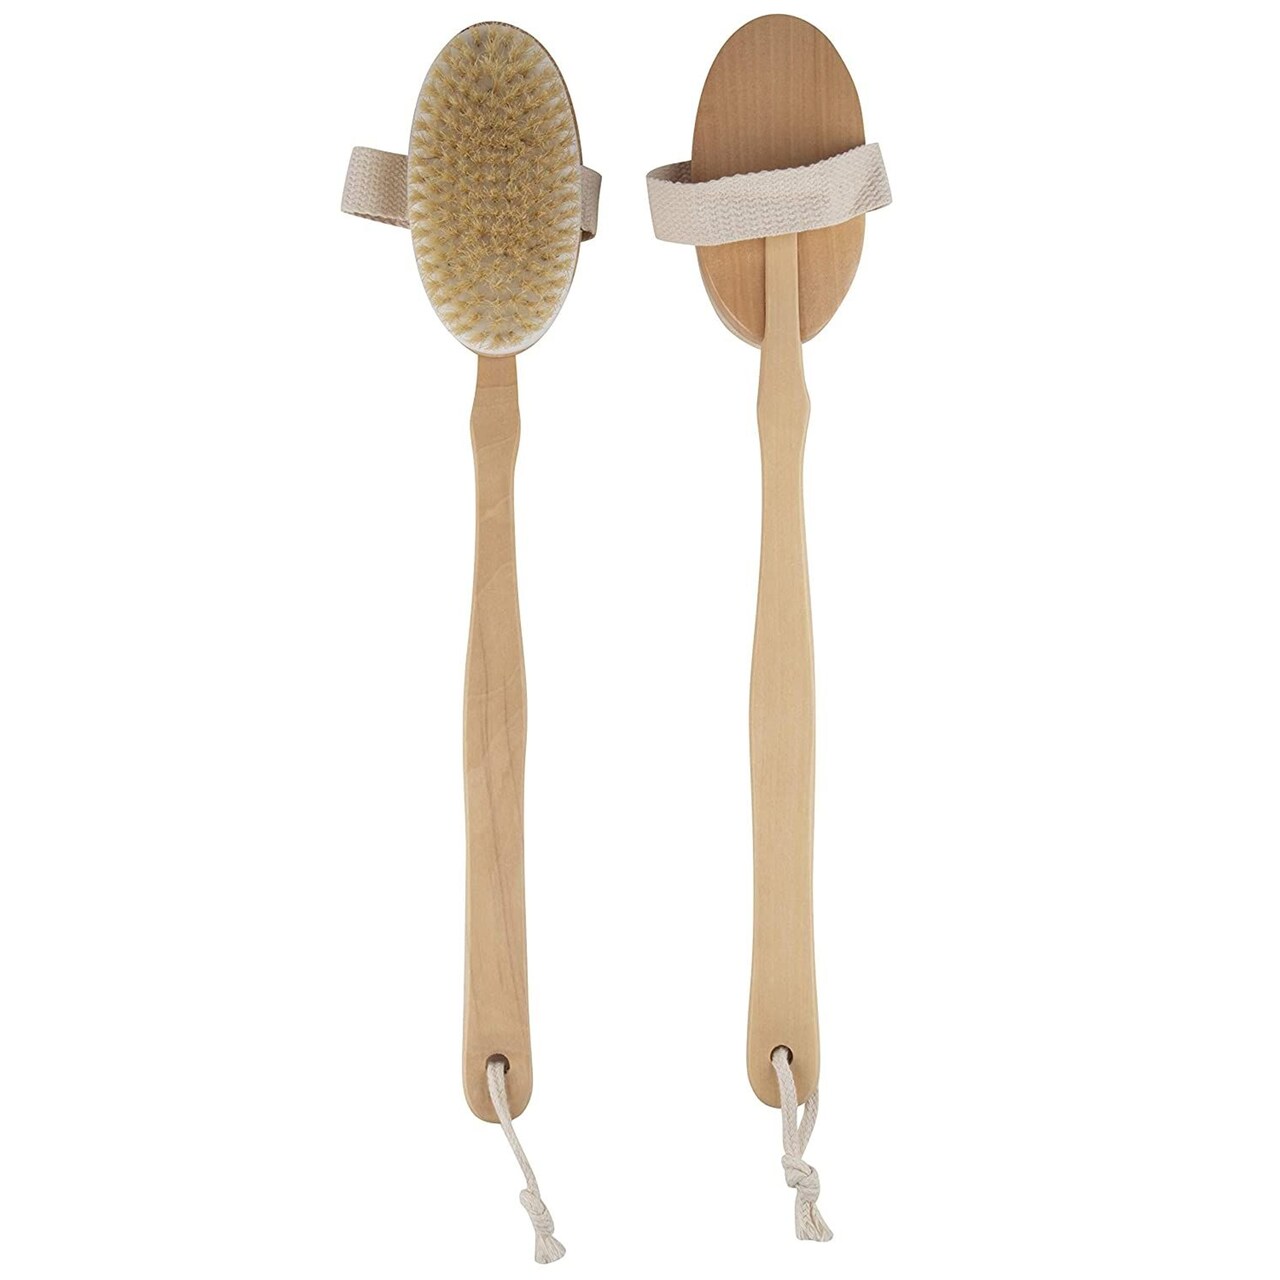 Dry Brushing Body Brush -2-Pack Natural Bristle Back Exfoliating Scrub with Detachable Long Handle and Hanging Loop, Shower, Beauty Spa, Skin Treatment, 16.9 Inches